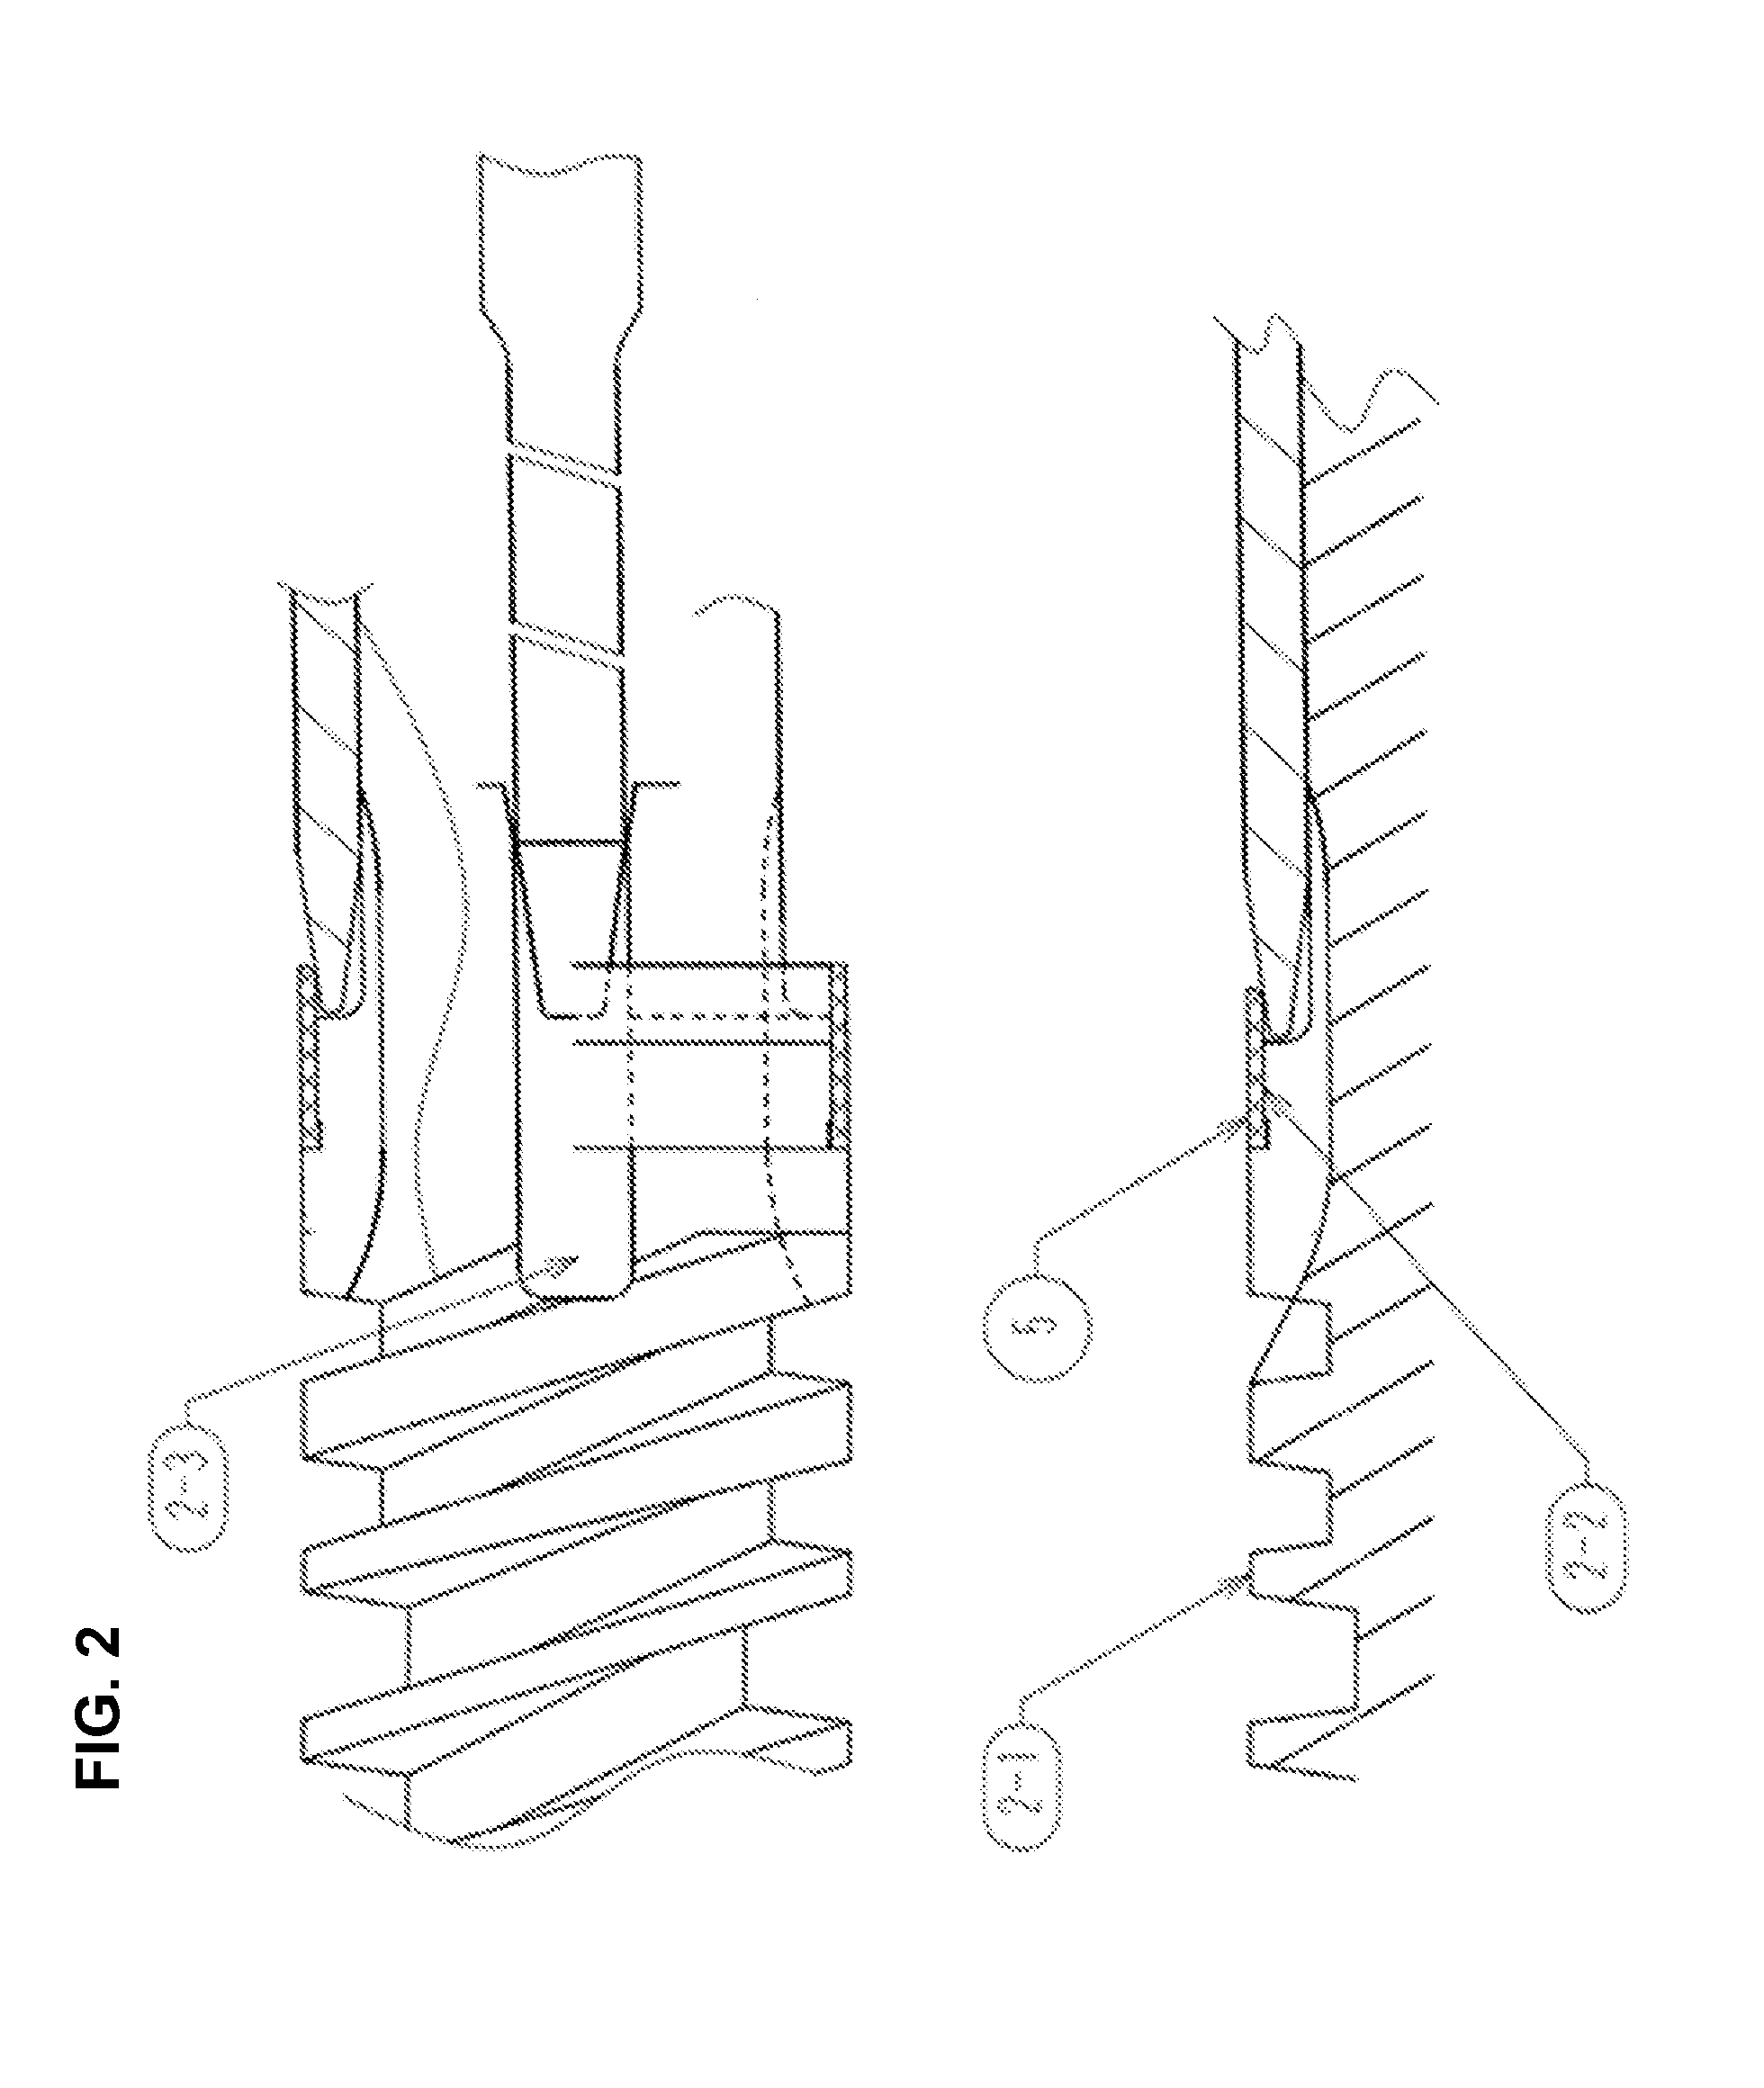 Osteosynthesis apparatus for proximal femur fracture and master screw-type screw apparatus for osteosynthesis apparatus for proximal femur fracture